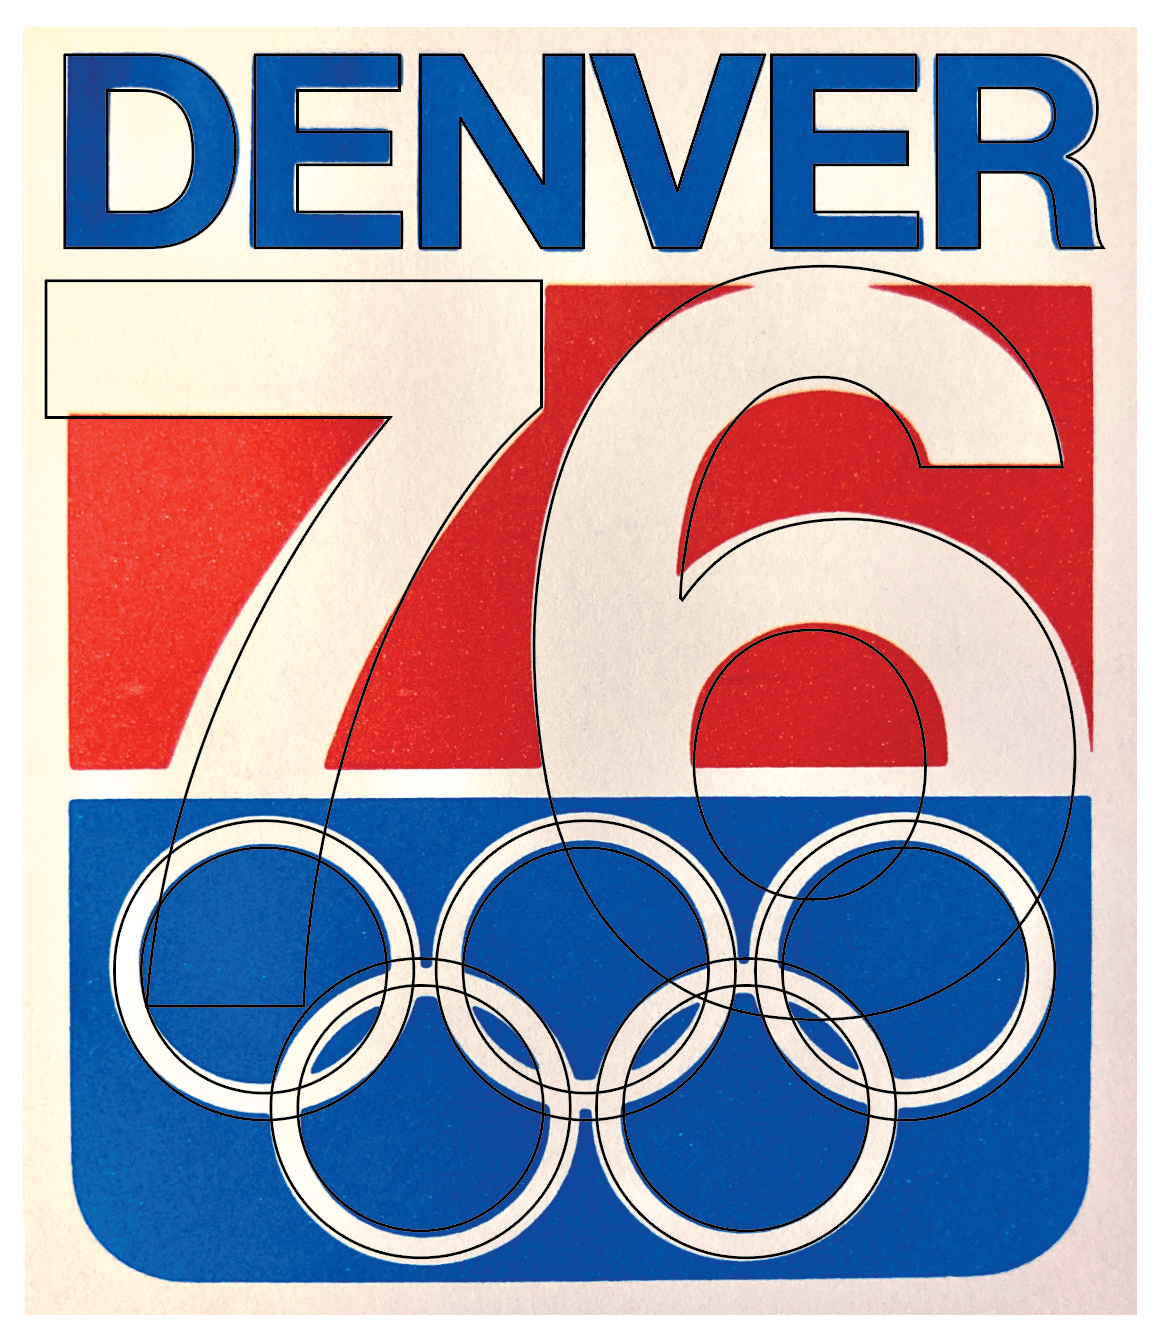 When I attempted to recreate the Denver 76 logo, I knew it was Helvetica, but it seems like it was a bit photographically smooshed to make it just right